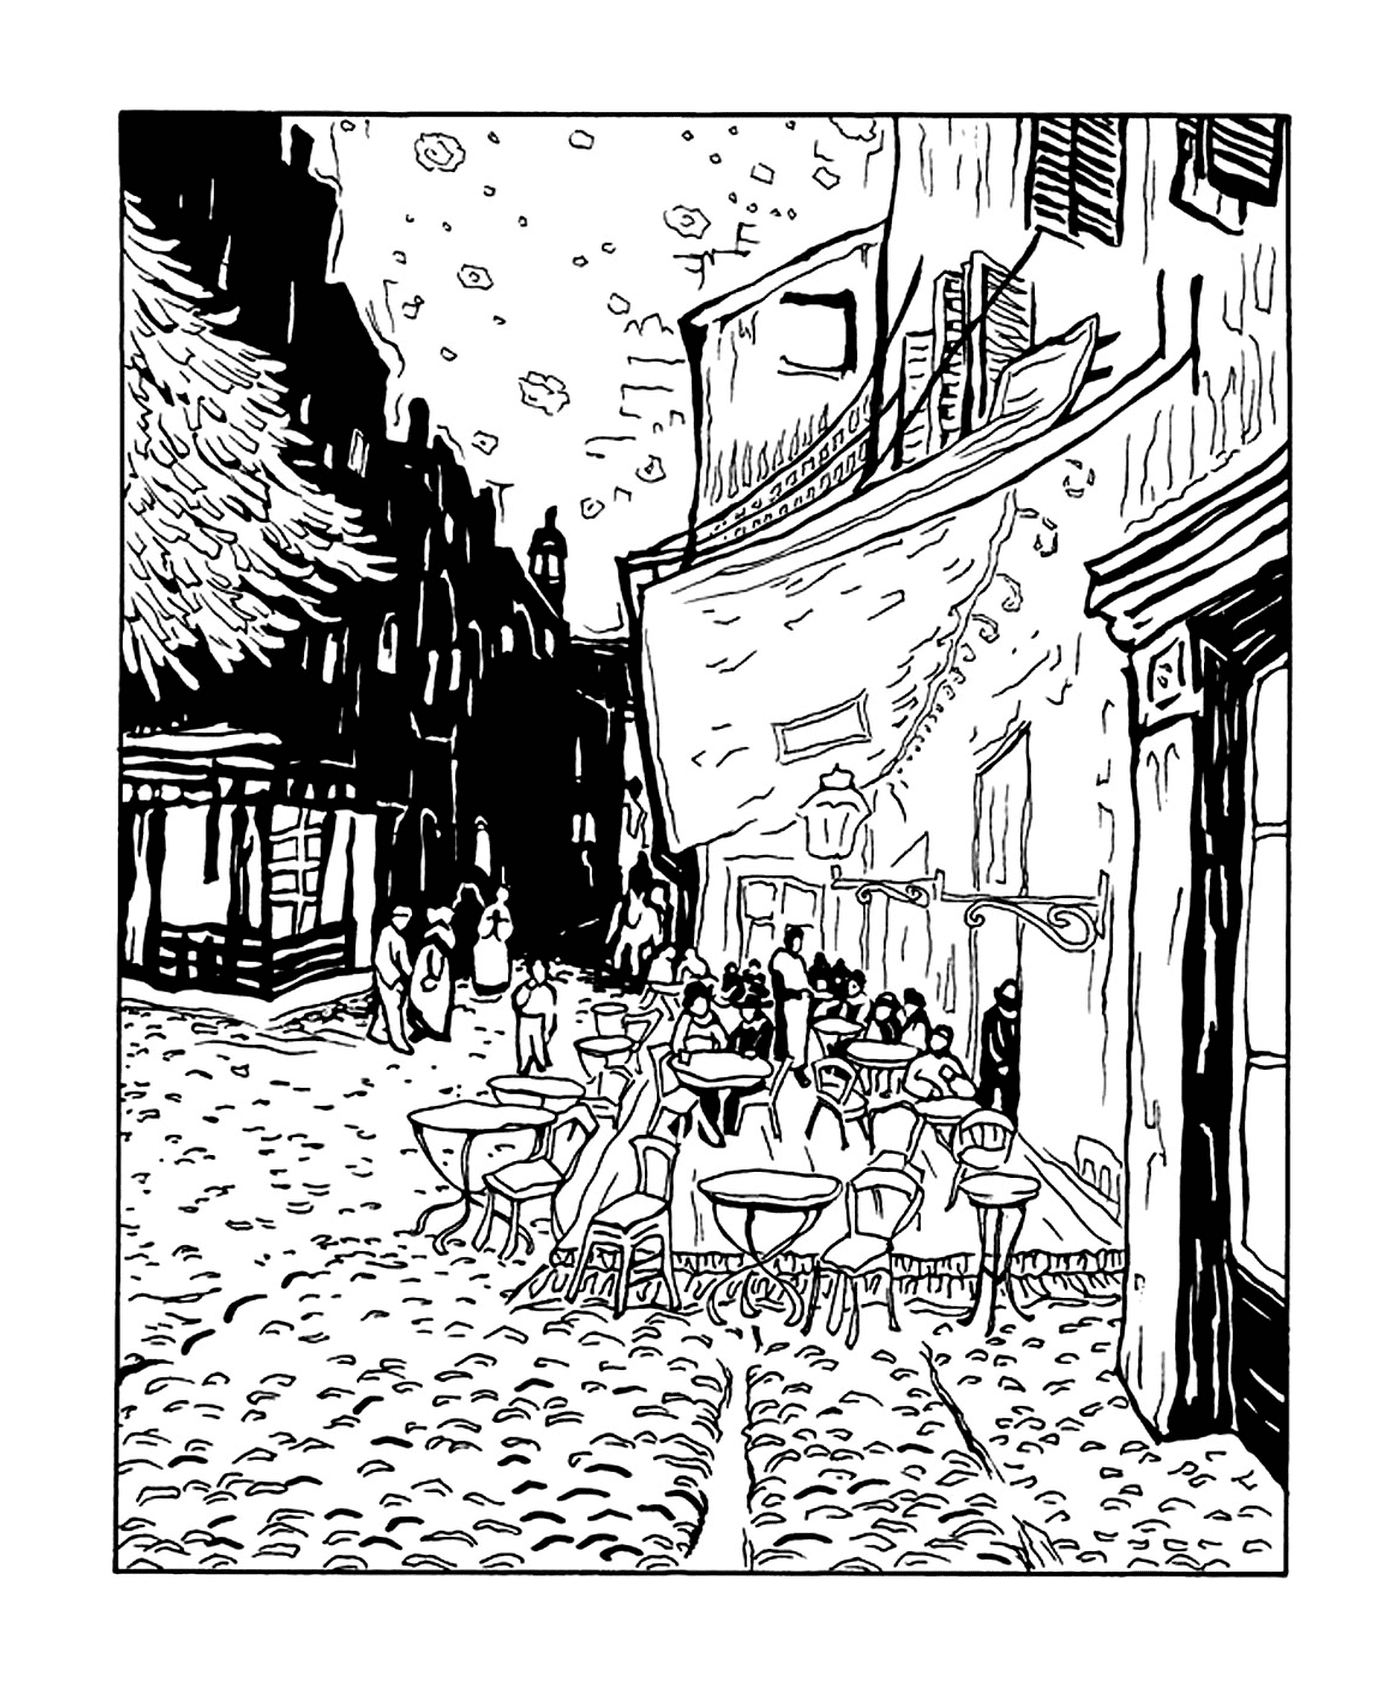  An ink image depicting an open-air coffee with tables and chairs 